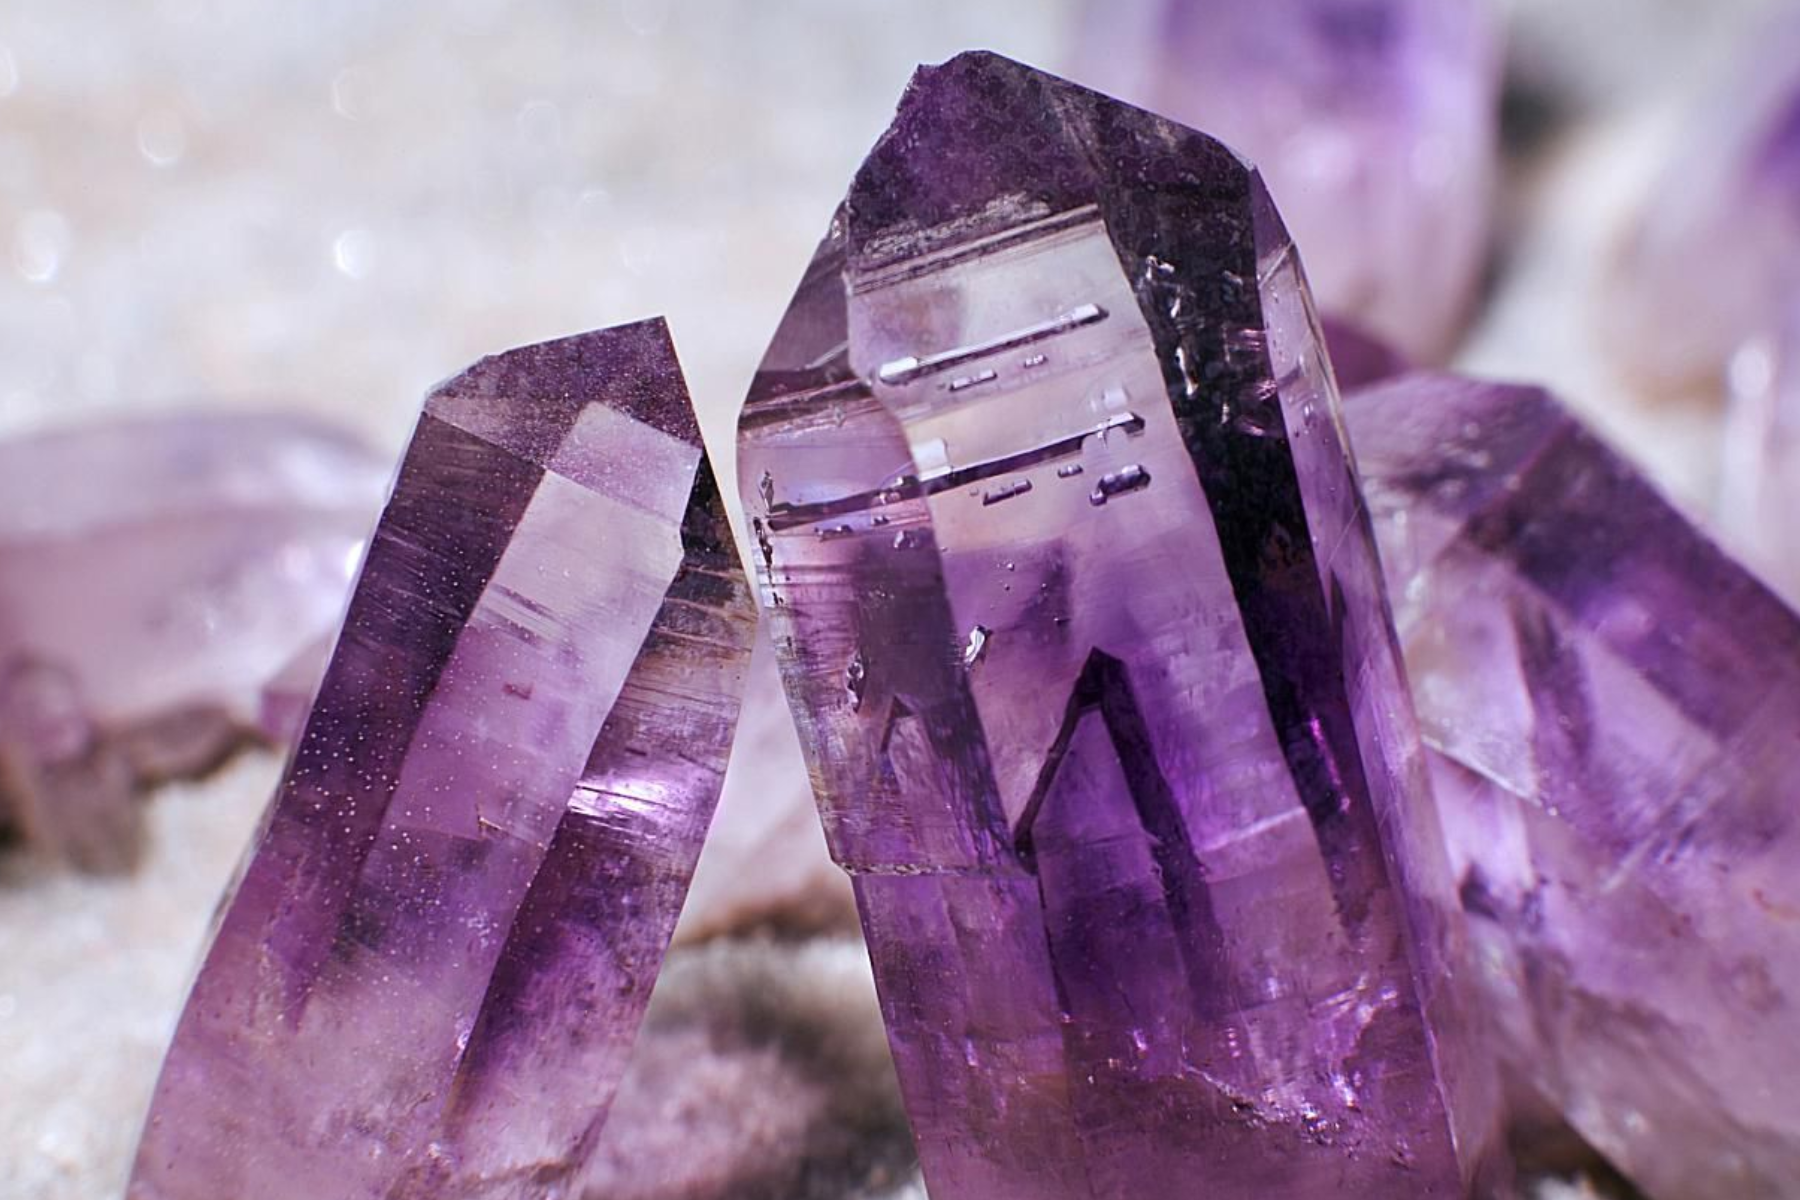 An image of several pieces of amethyst crystals.